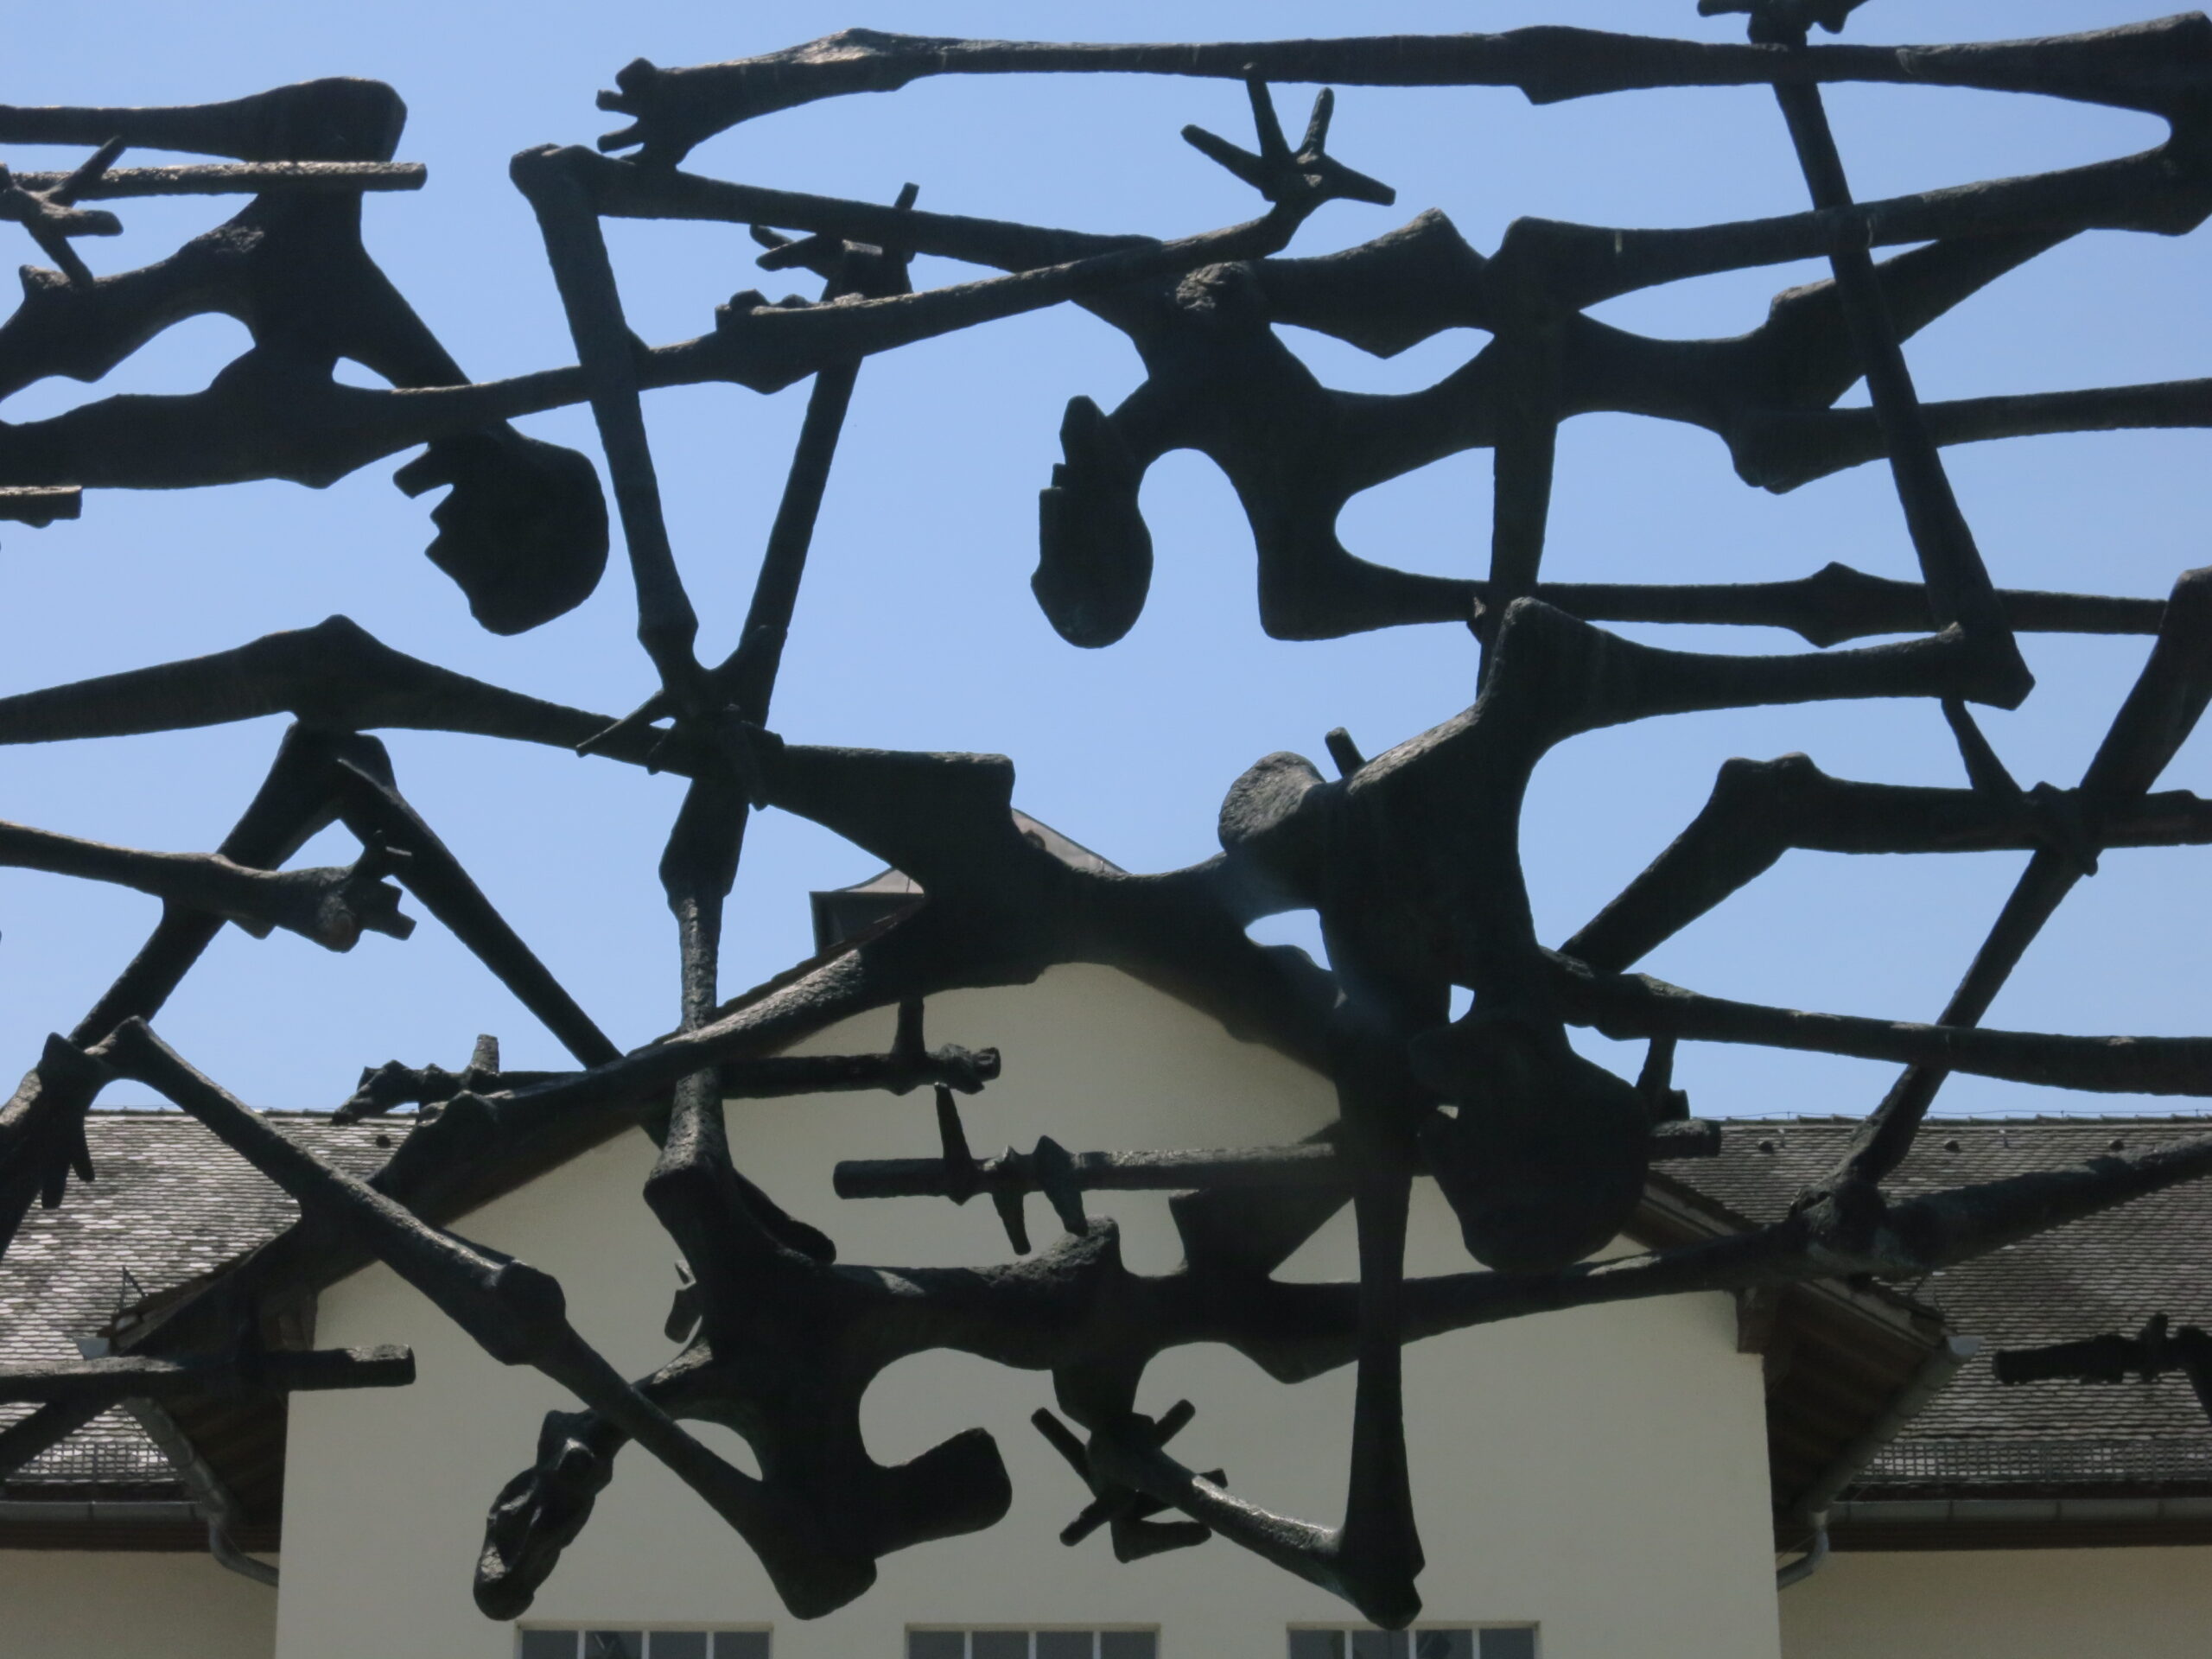 Image of sculpture in the Dachau concentration camp memorial in Germany, 2015.